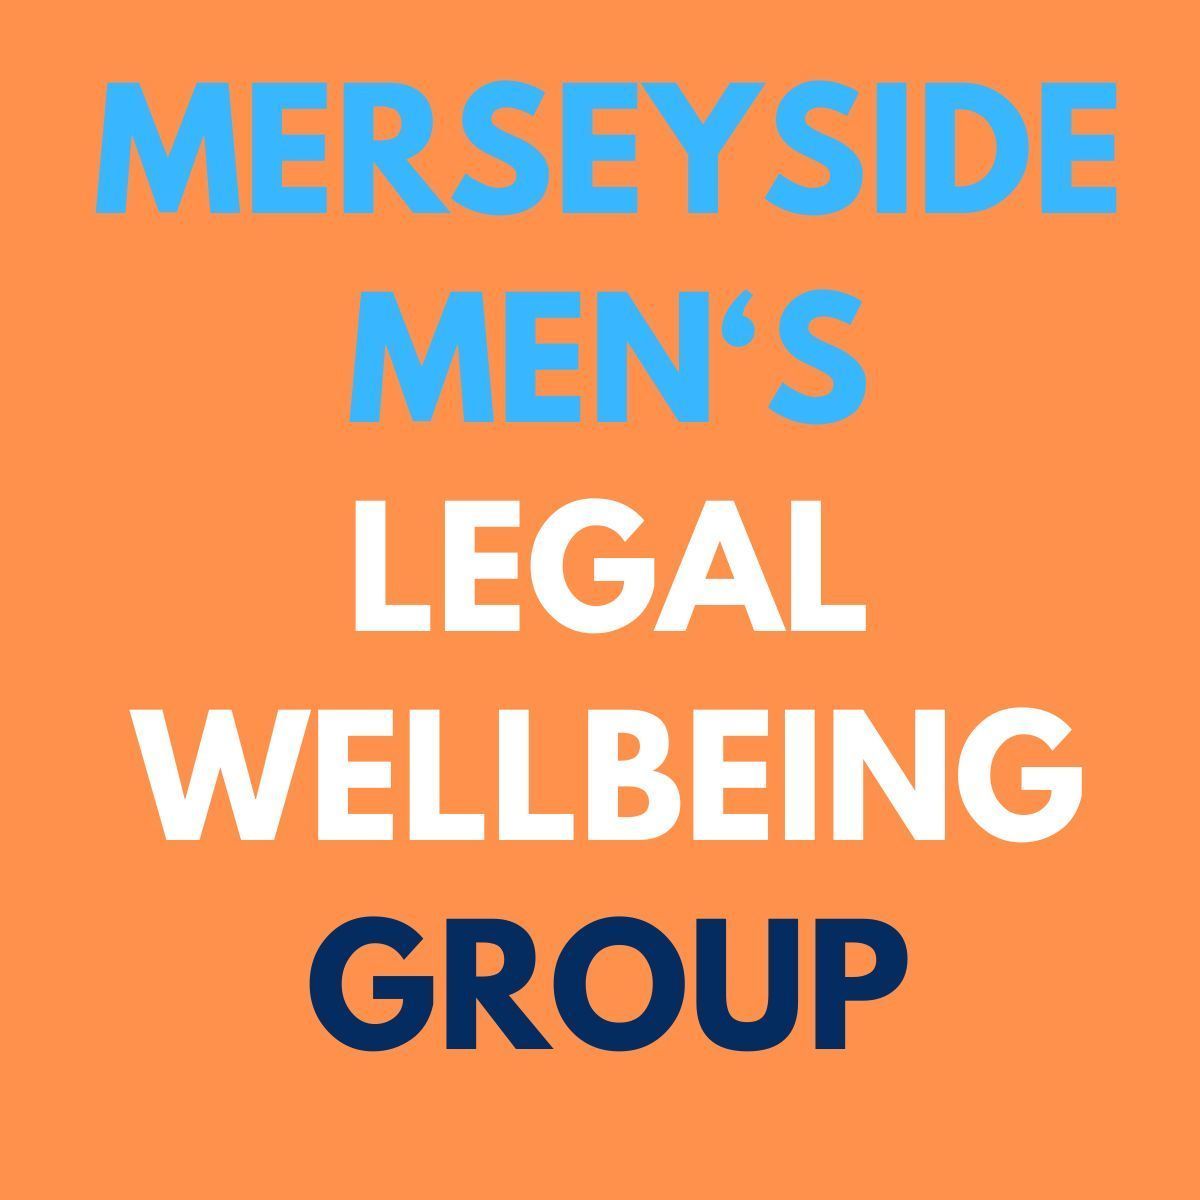 Every last Friday in the month Merseyside Men's Legal Wellbeing Group gives men a place to talk. Find out more about this group that offers a supportive environment with your professional peers ⬇ liverpoollawsociety.org.uk/news/merseysid… #mentalhealth #wellbeing #law #Lawyers